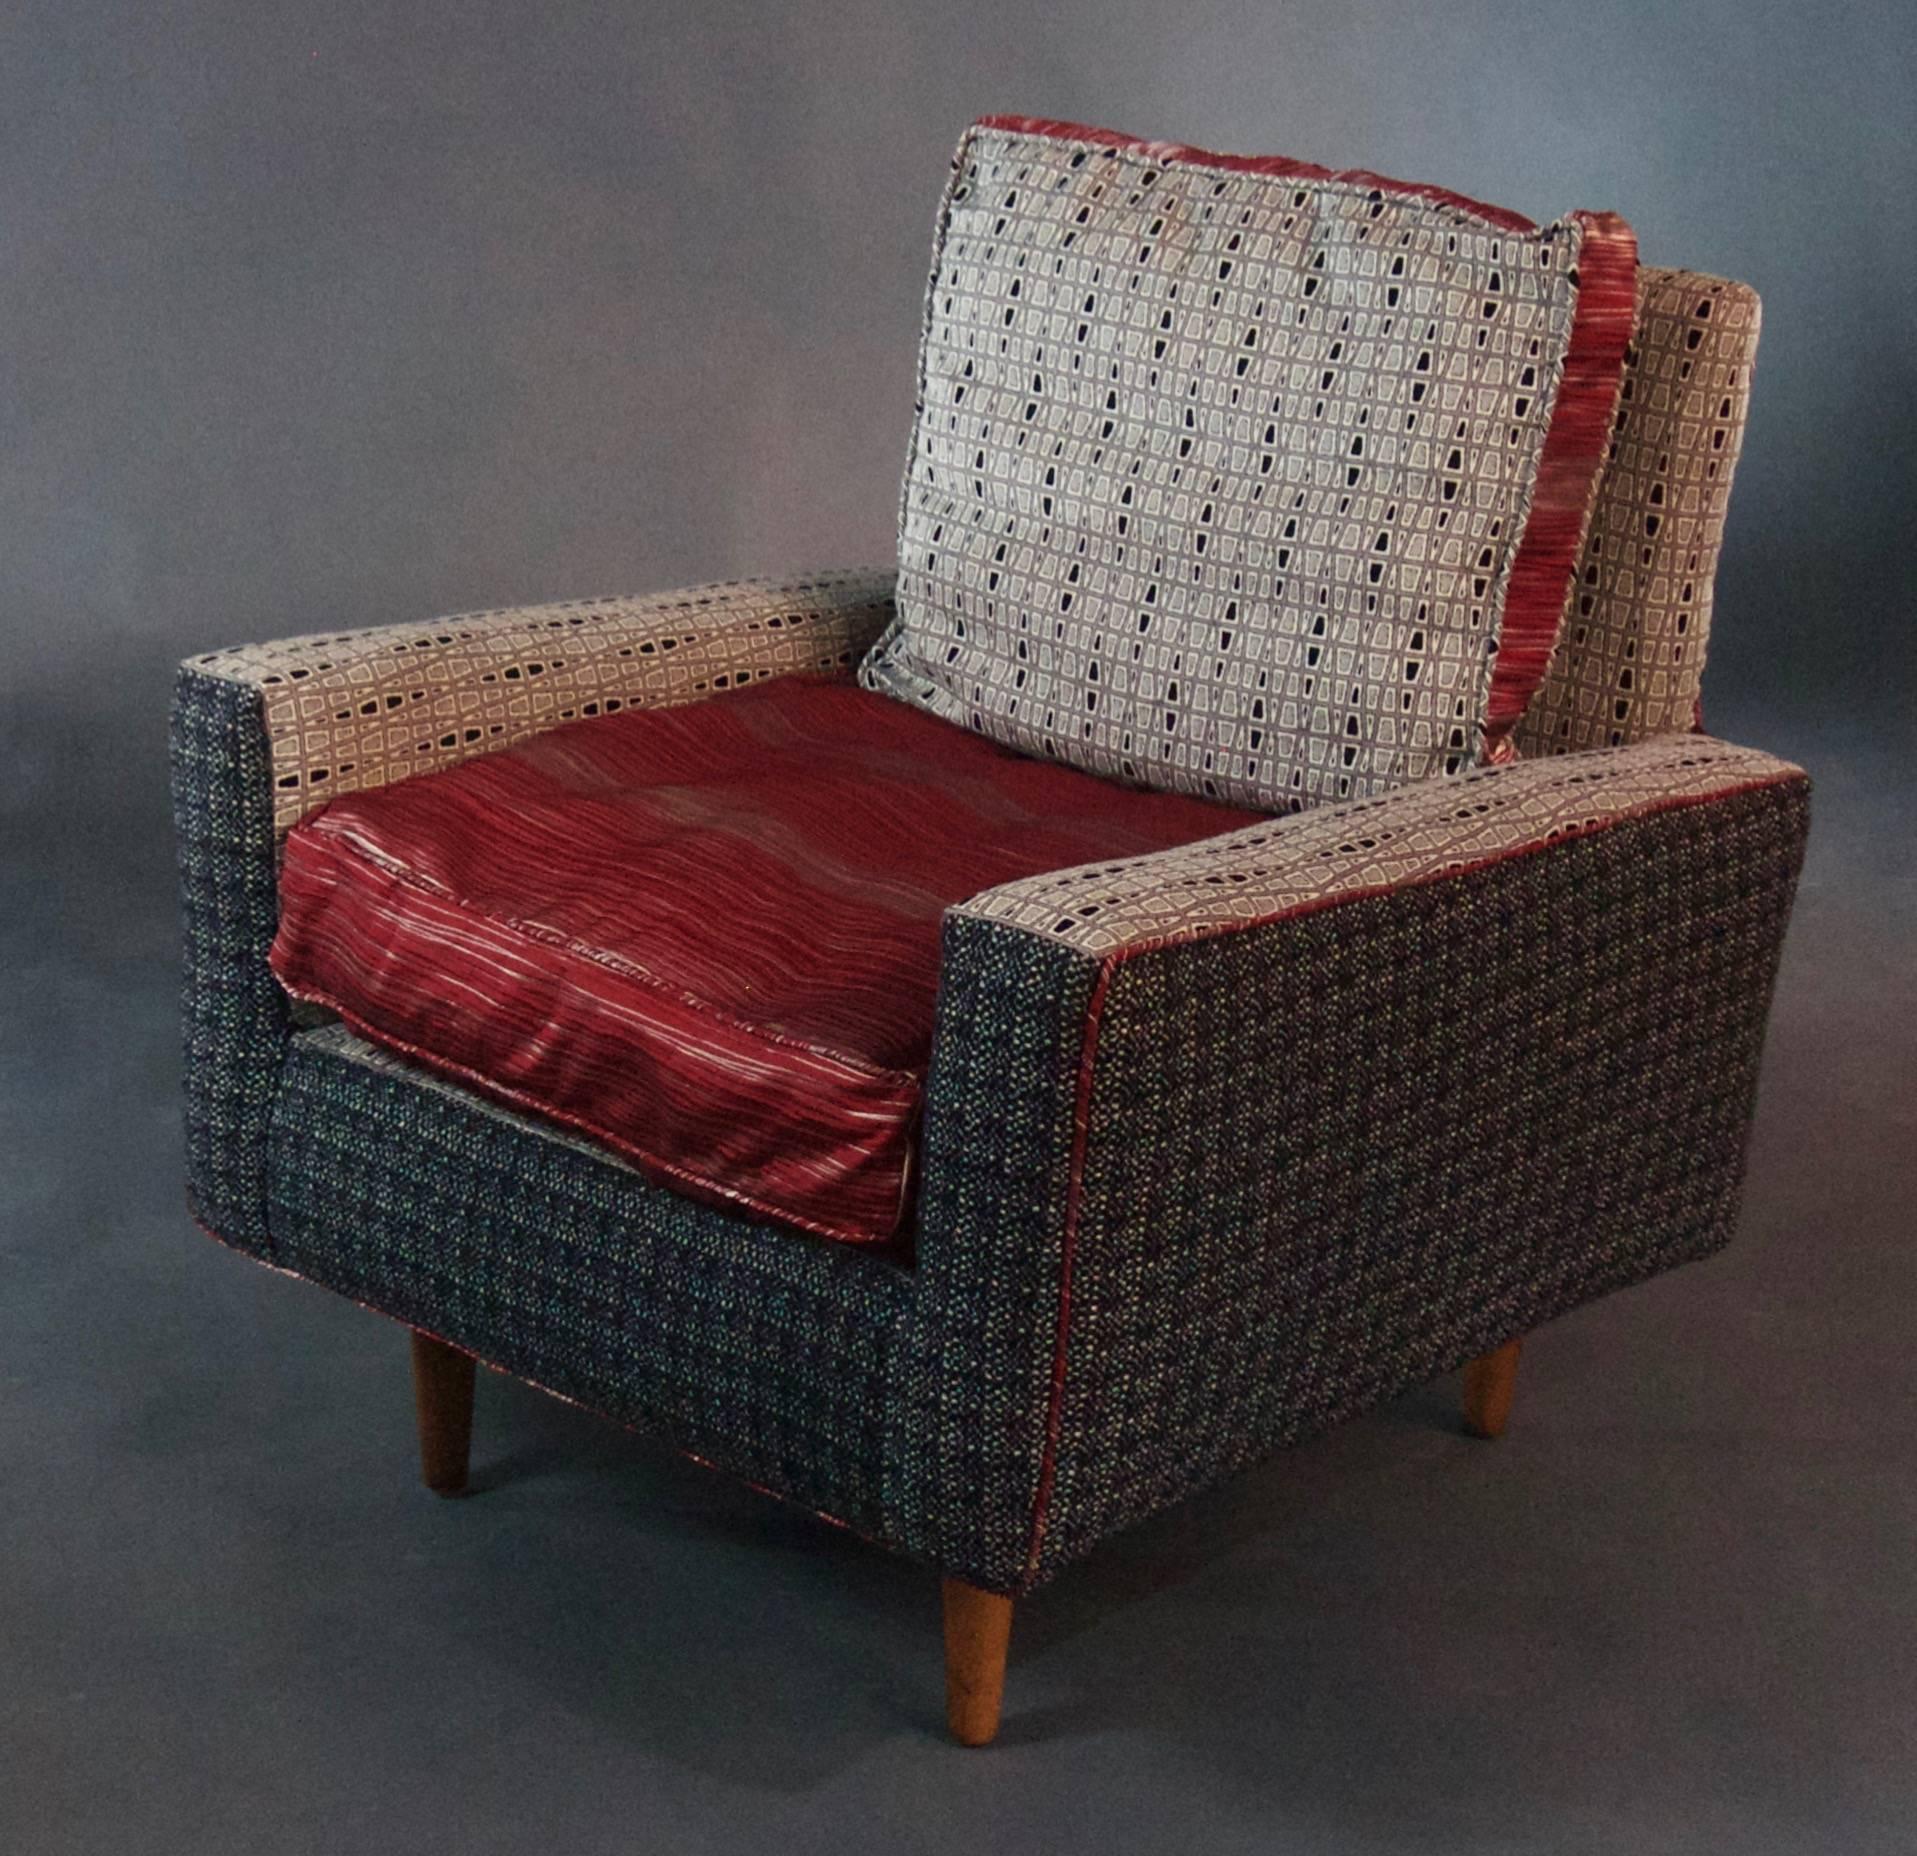 A labelled Knoll armchair with down cushions and Classic cotton fill, under new upholstery. Upholstery is a charcoal gray wool flannel outside, combined with a modern soft white and charcoal print inside--both accented by a red silk blend. This